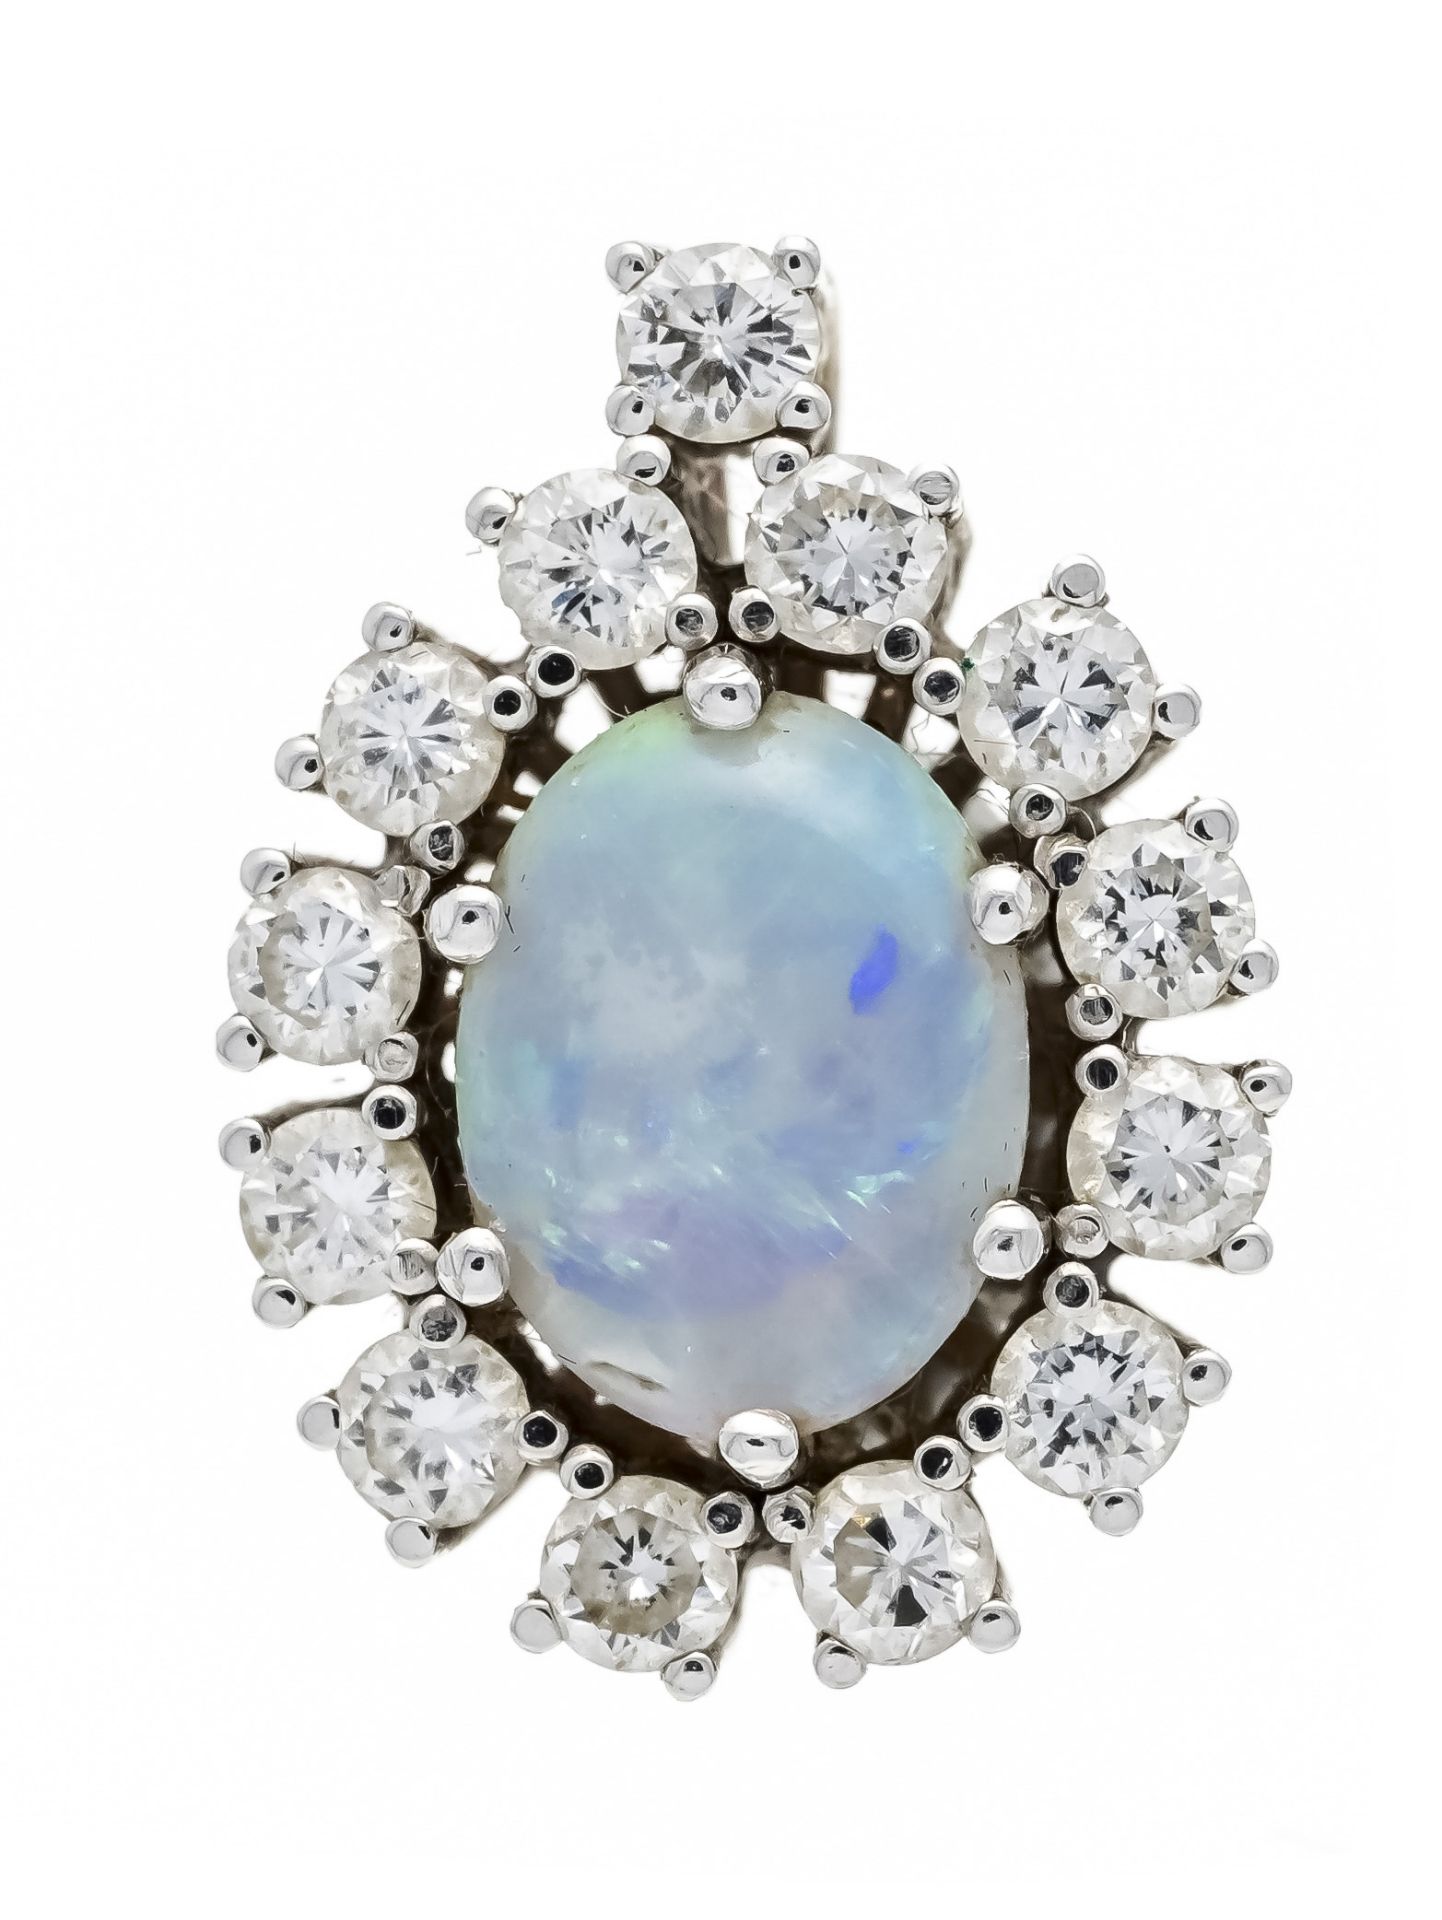 Opal-brilliant pendant WG 585/000 with an oval opal cabochon 8 x 6 mm in a good - light play of